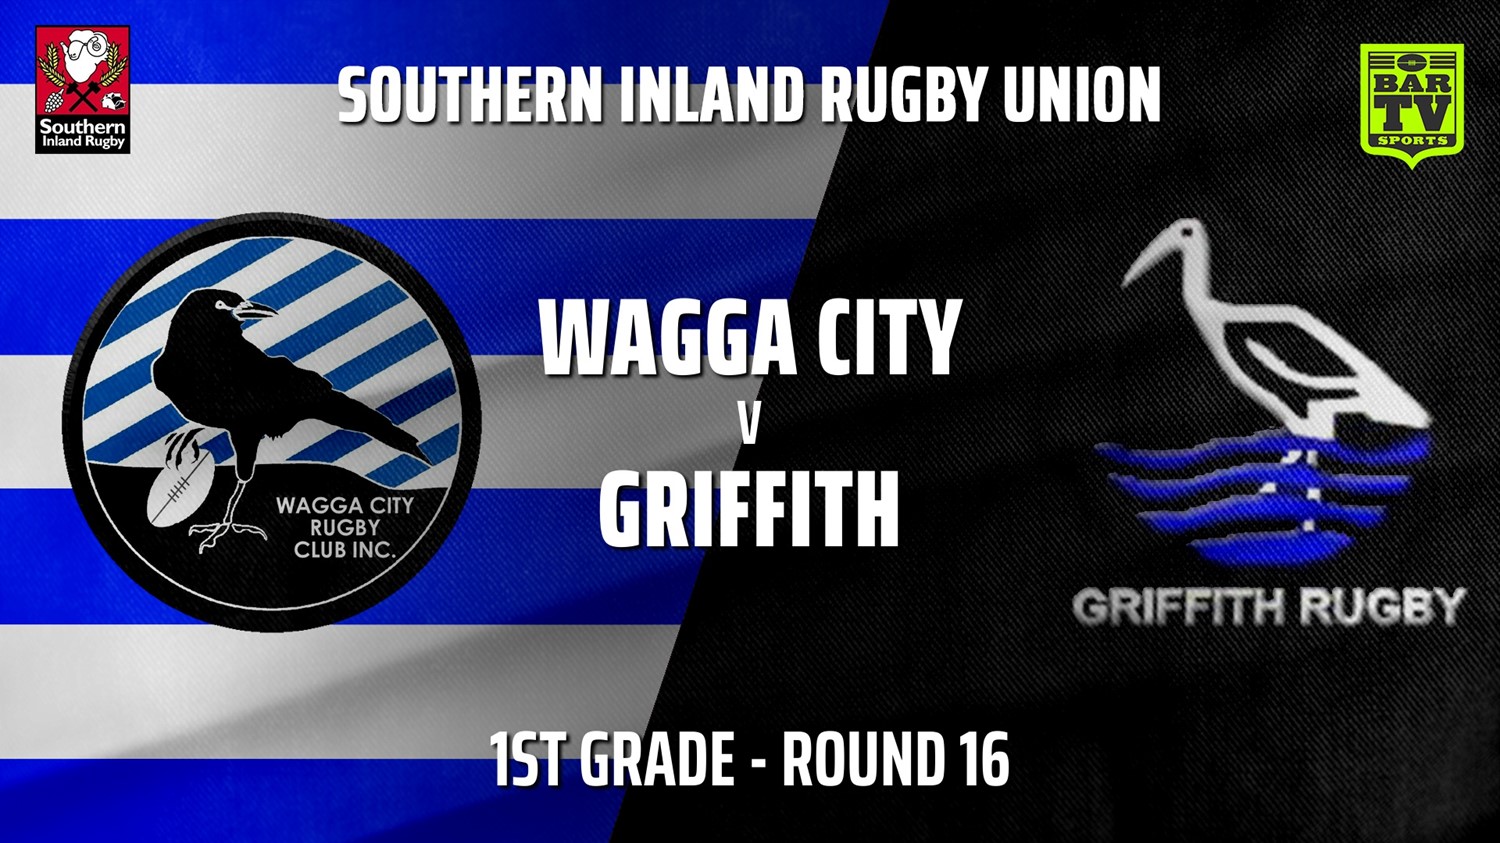 210731-Southern Inland Rugby Union Round 16 - 1st Grade - Wagga City v Griffith Slate Image